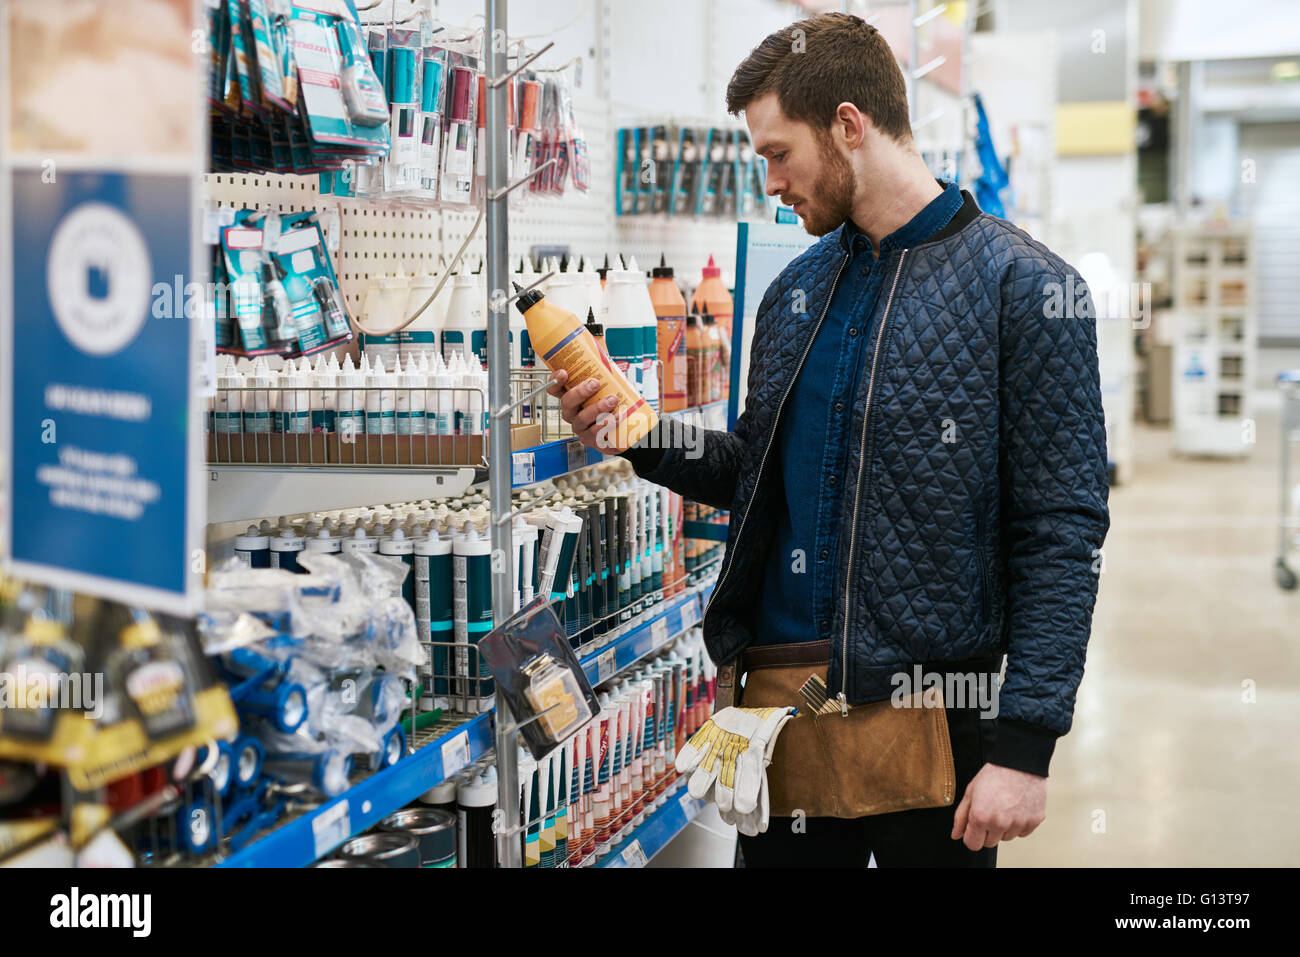 Handyman selecting a product at a hardware store standing reading the label on a container, profile view Stock Photo